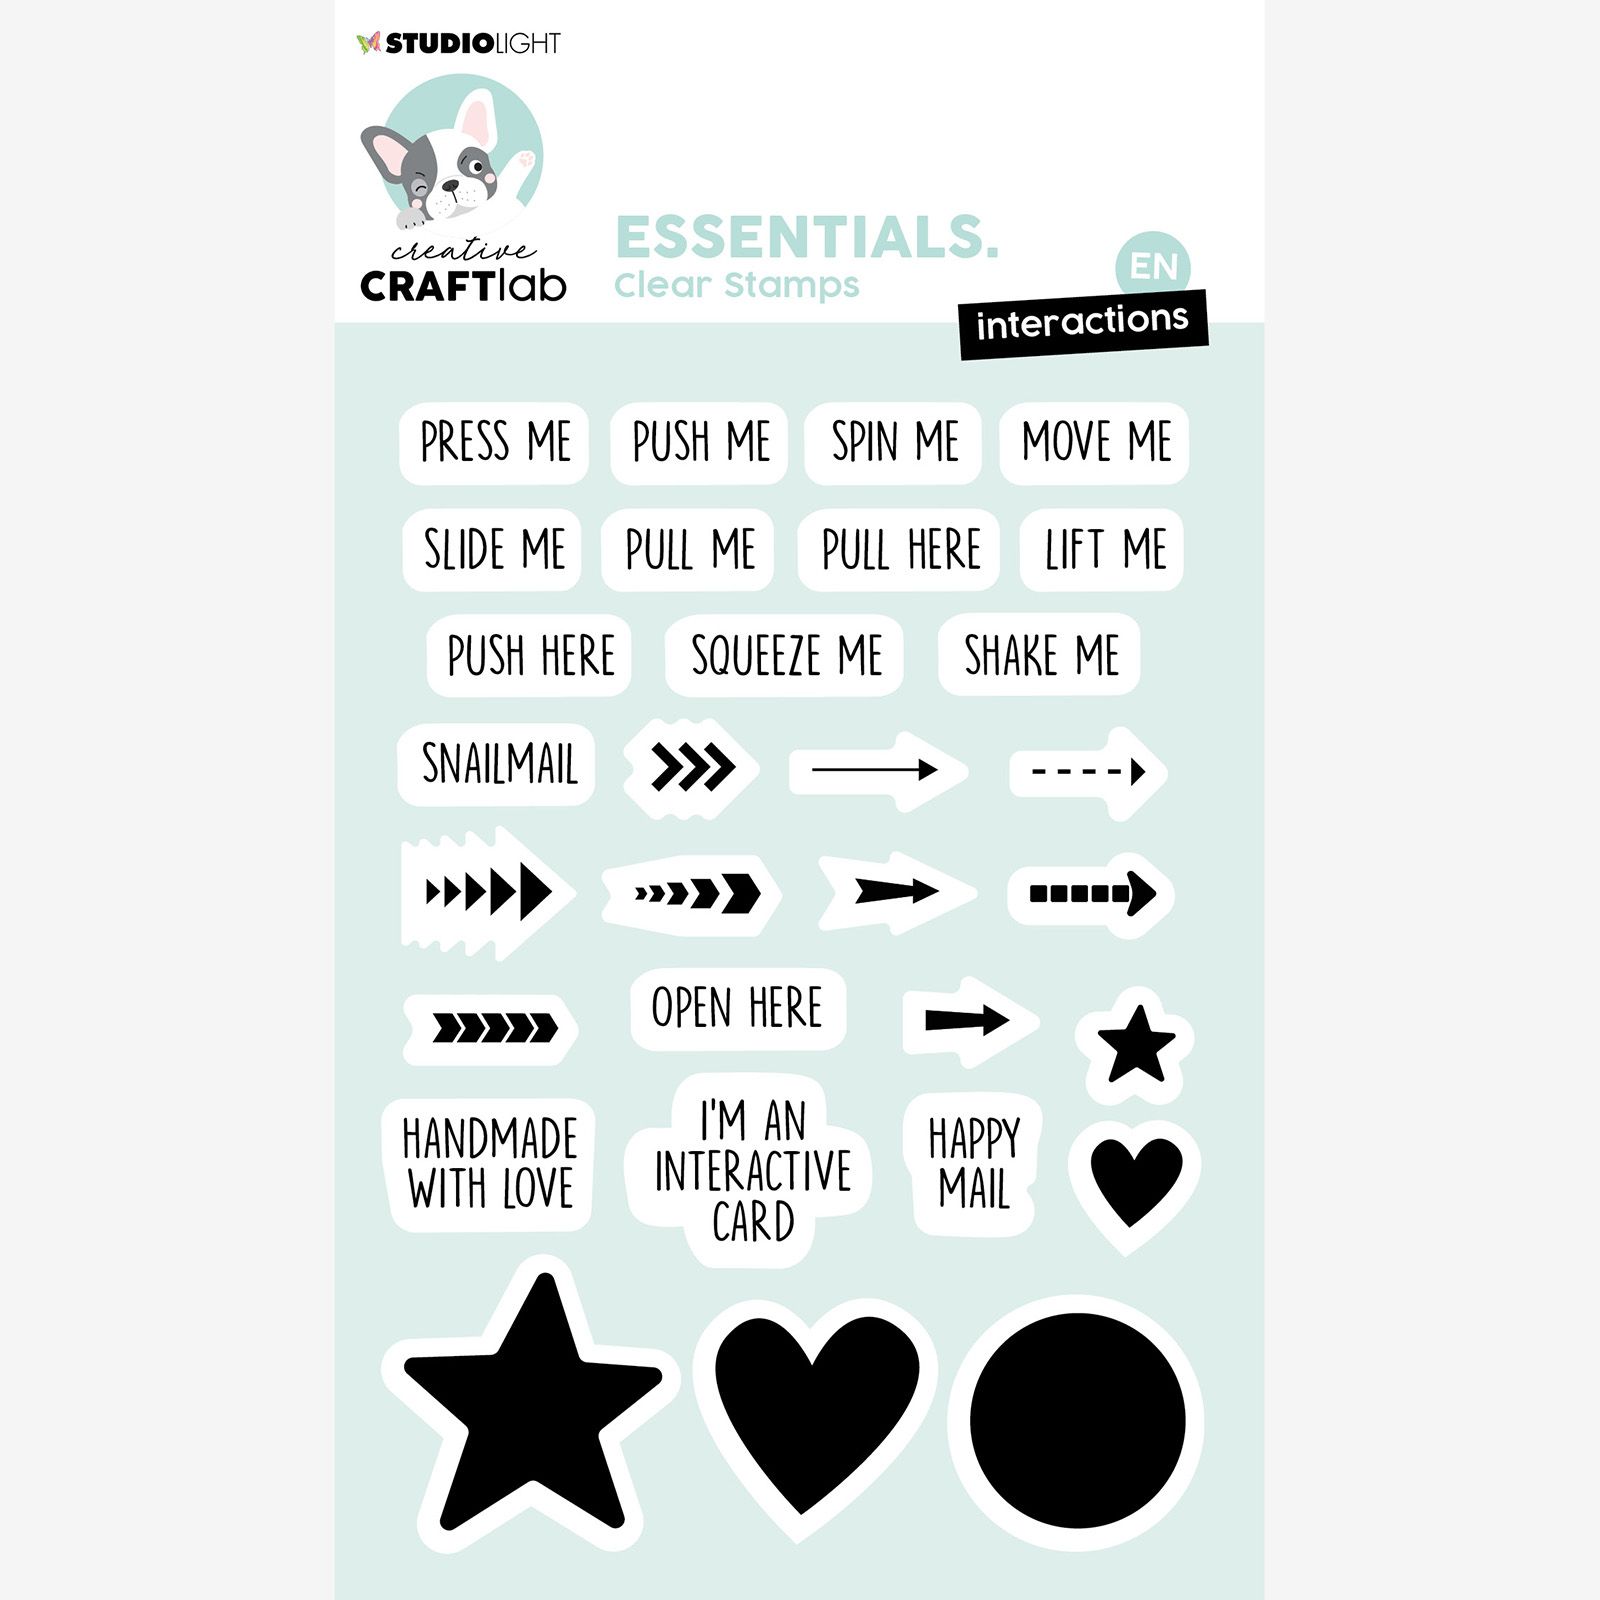 Creative Craftlab • Essentials Sello Transparente Text Interactions For Slider Pop-Up